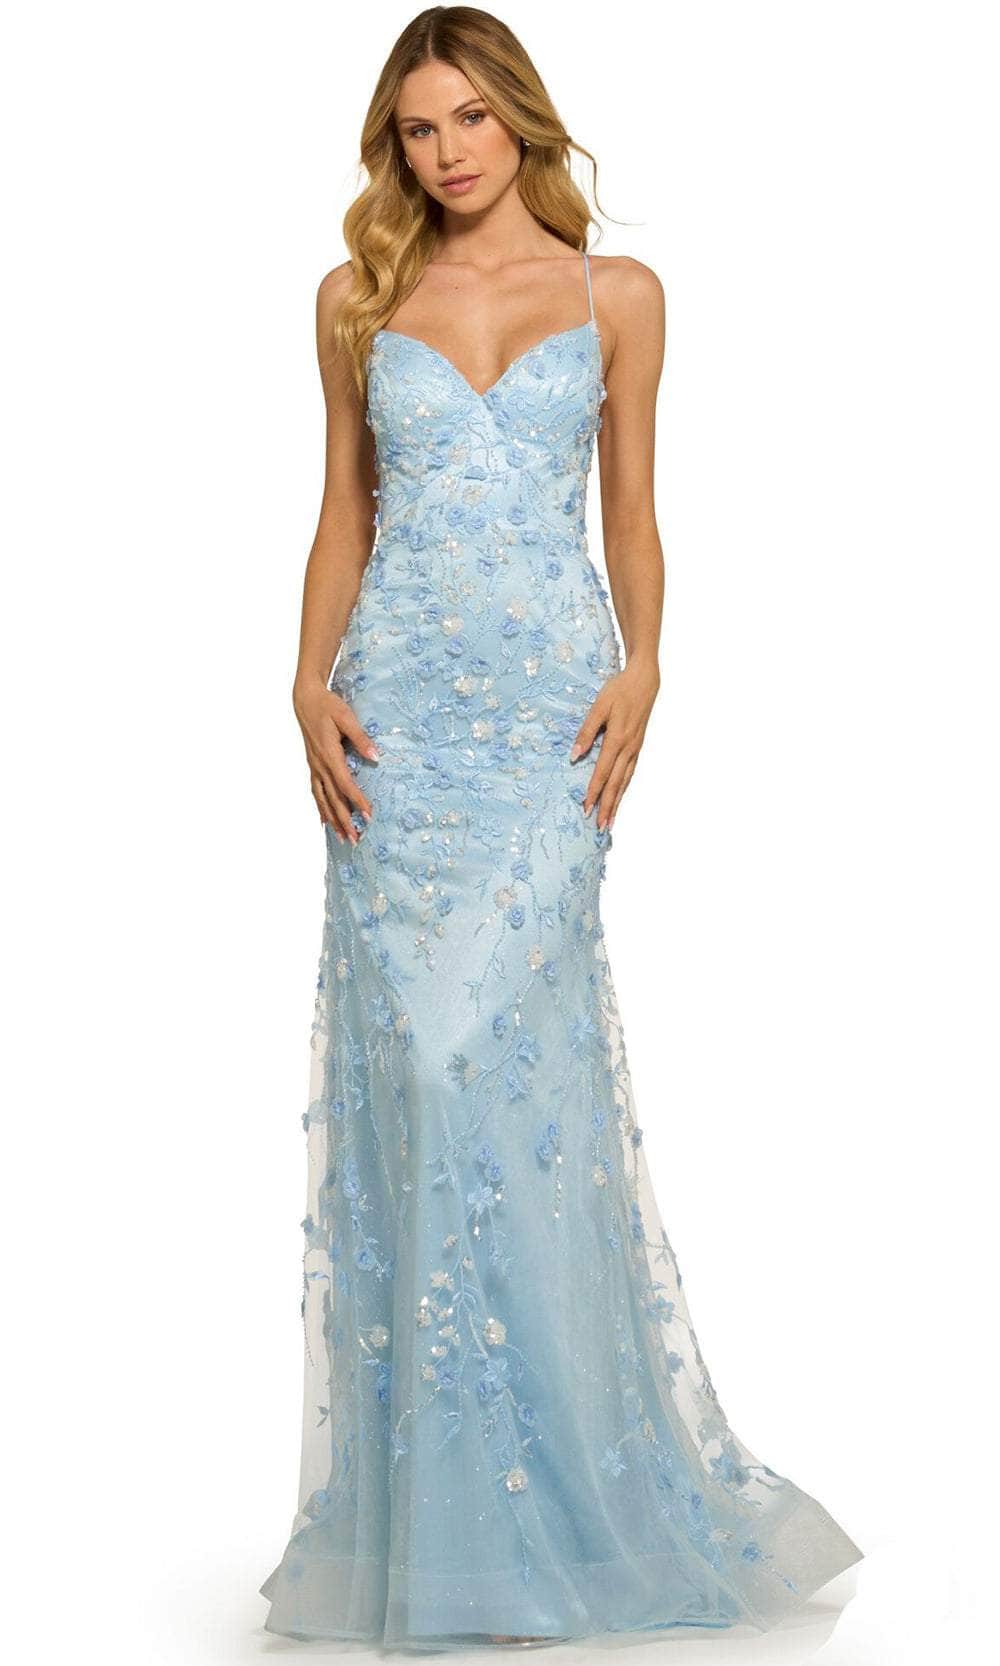 Image of Sherri Hill 55531 - Thin Strapped Floral Patterned Long Gown